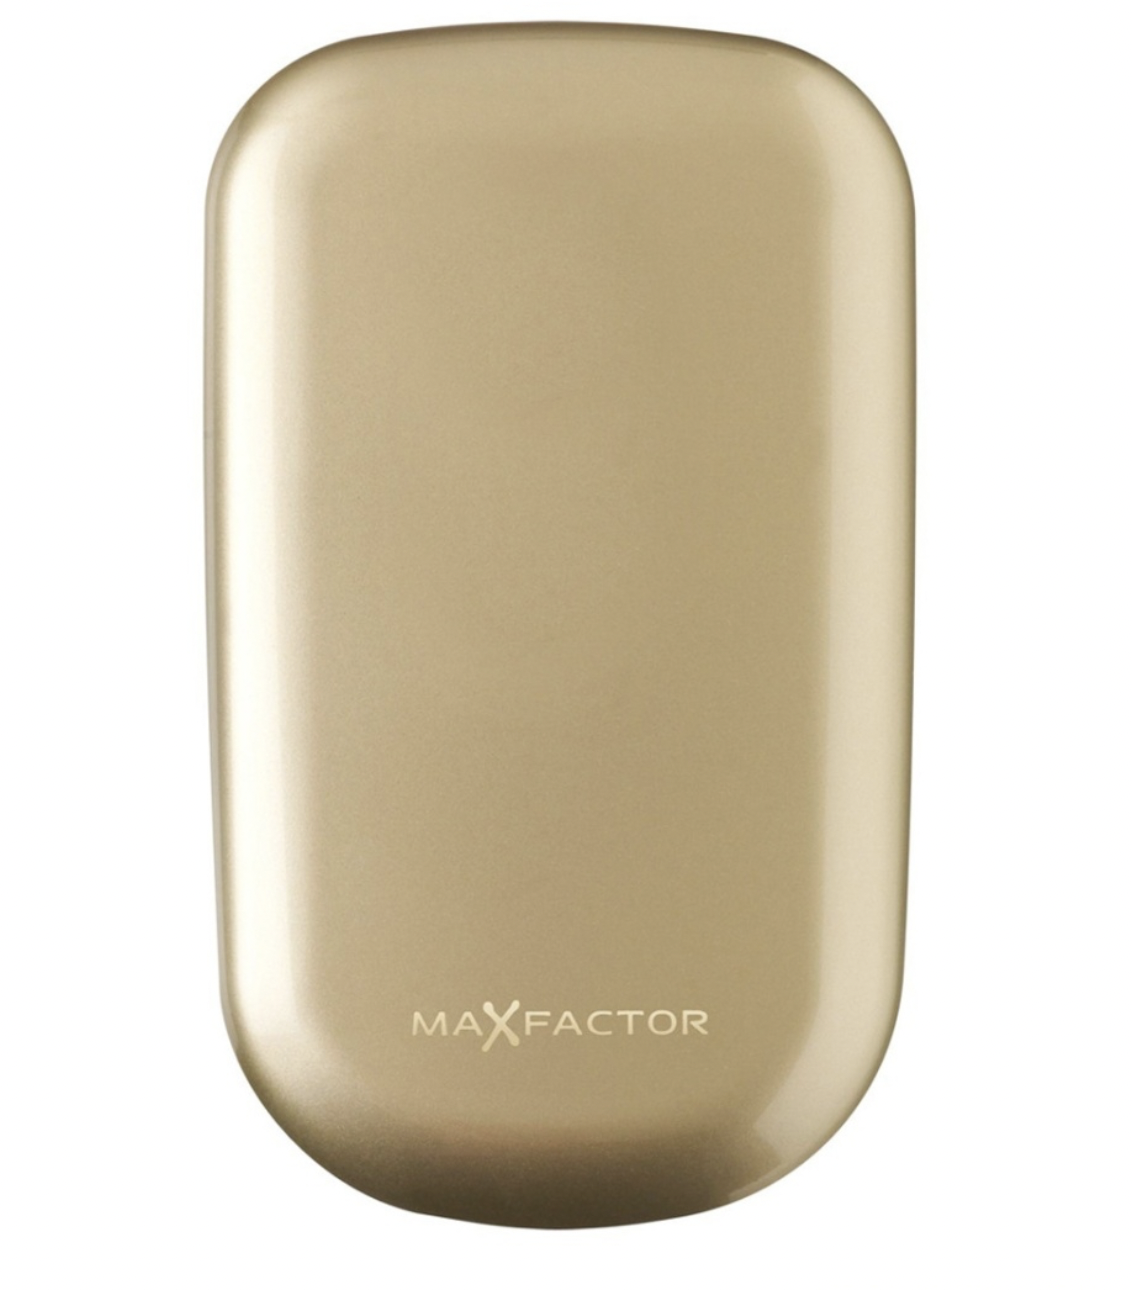    / Max Factor -     21 Facefinity  002 Ivory 10 